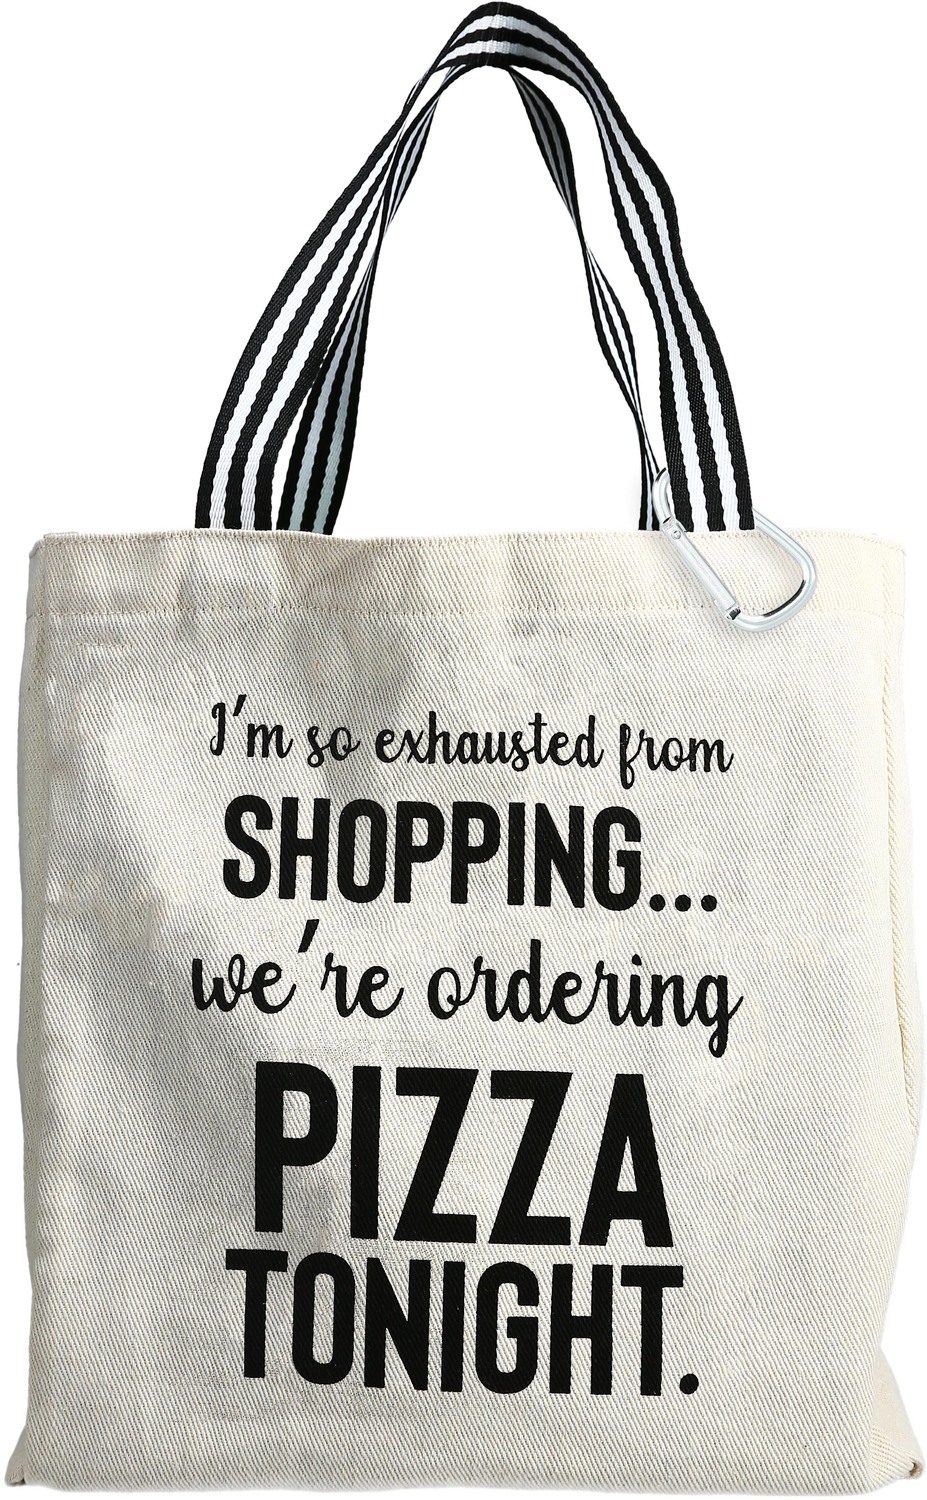 Pizza Tonight by Check Me Out - Pizza Tonight - 100% Cotton Twill Gift Bag